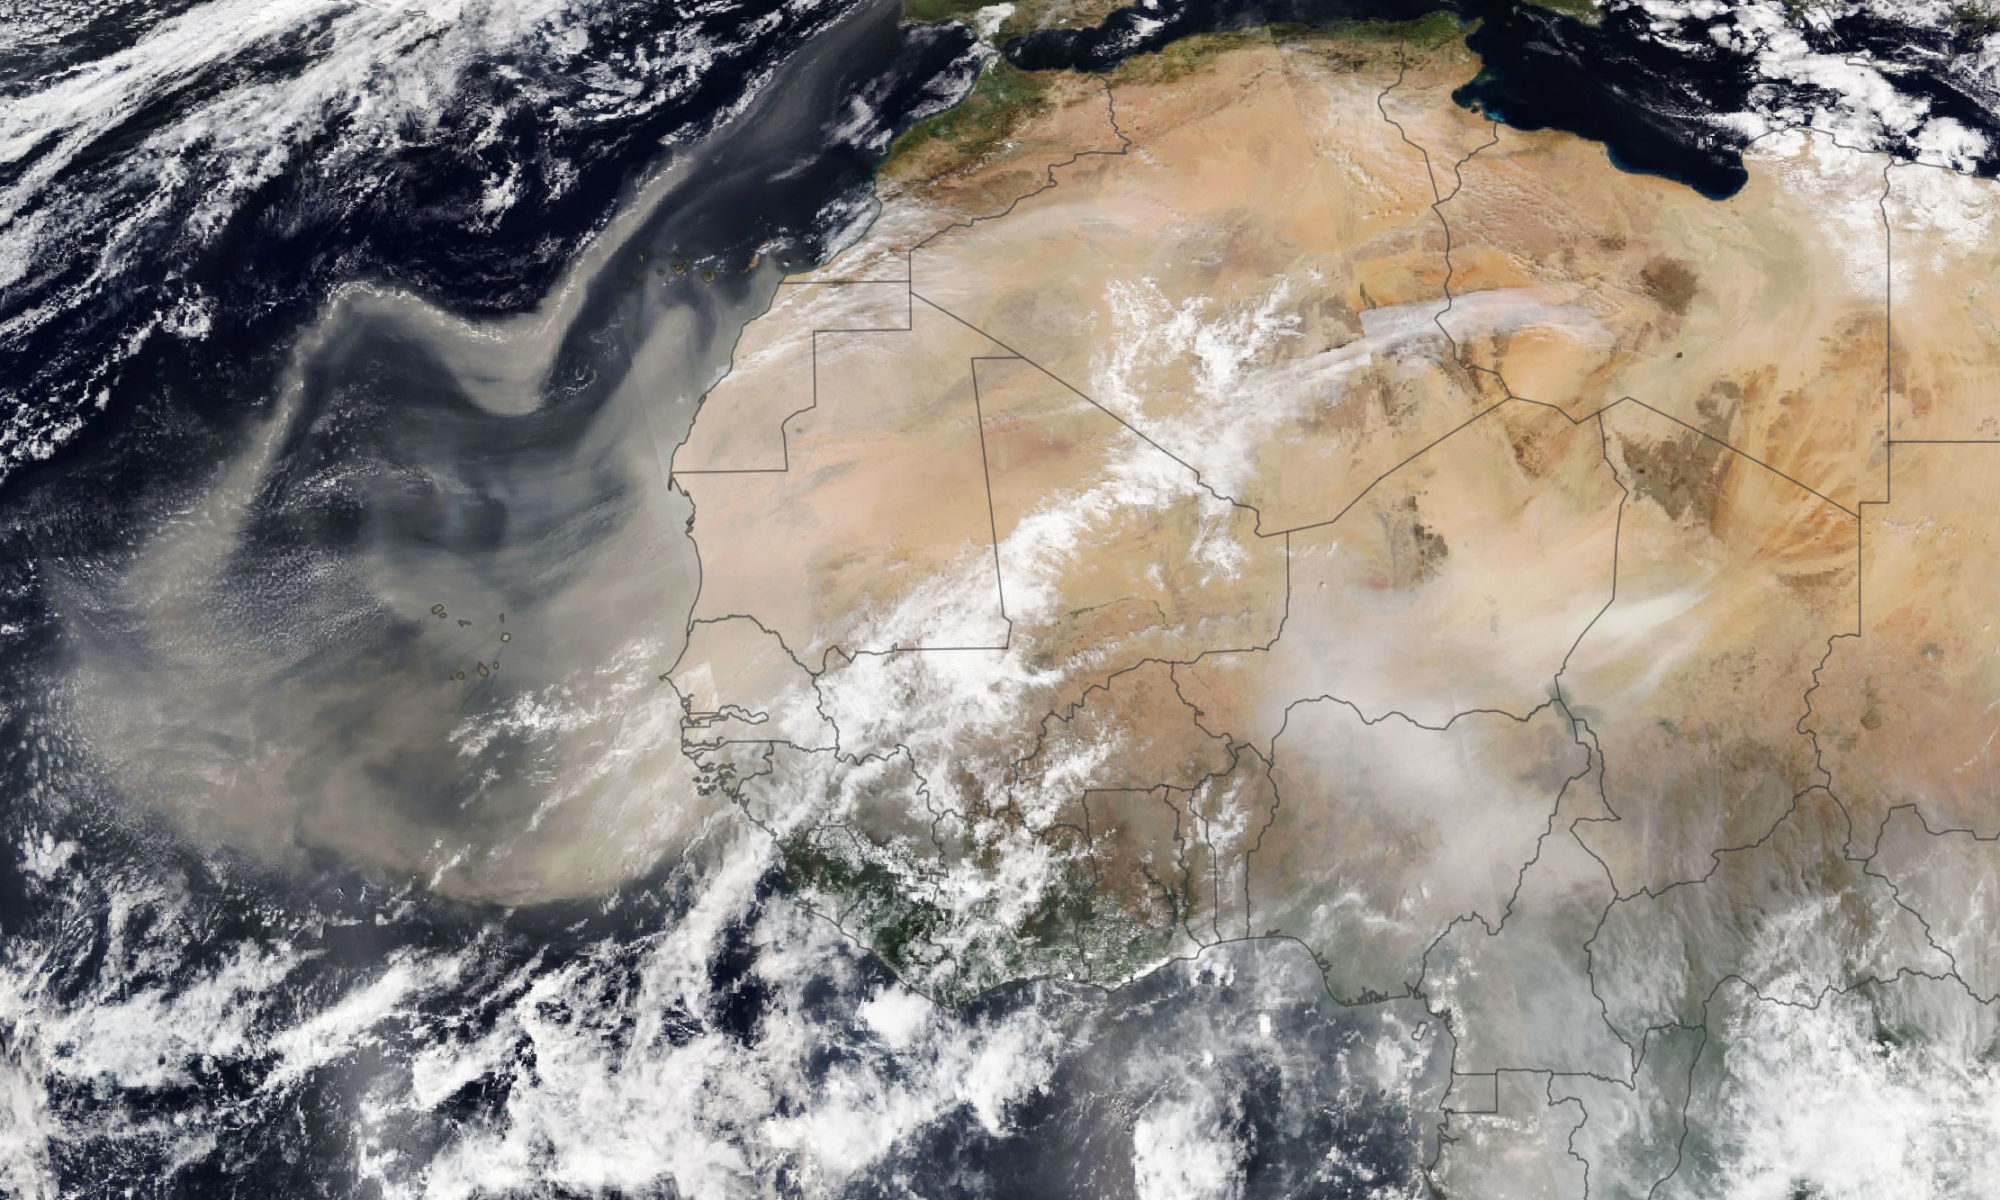 Satellite image showing plume of dust drifting from north Africa